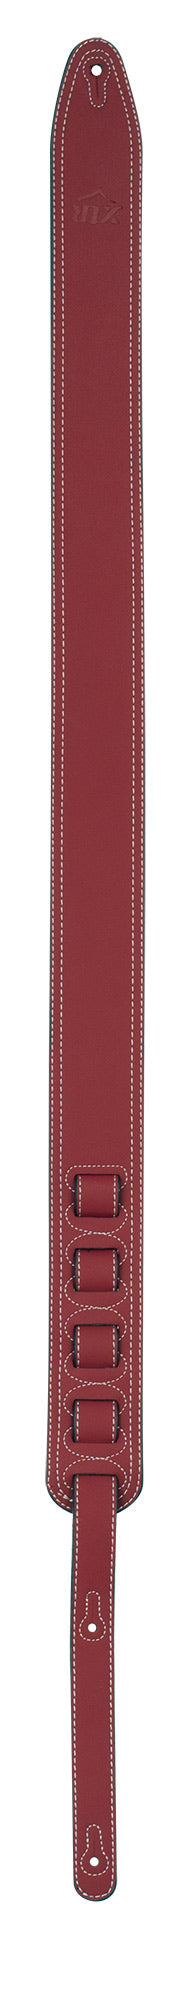  XTR | LS249 | Leather Guitar Strap | Smooth Brown